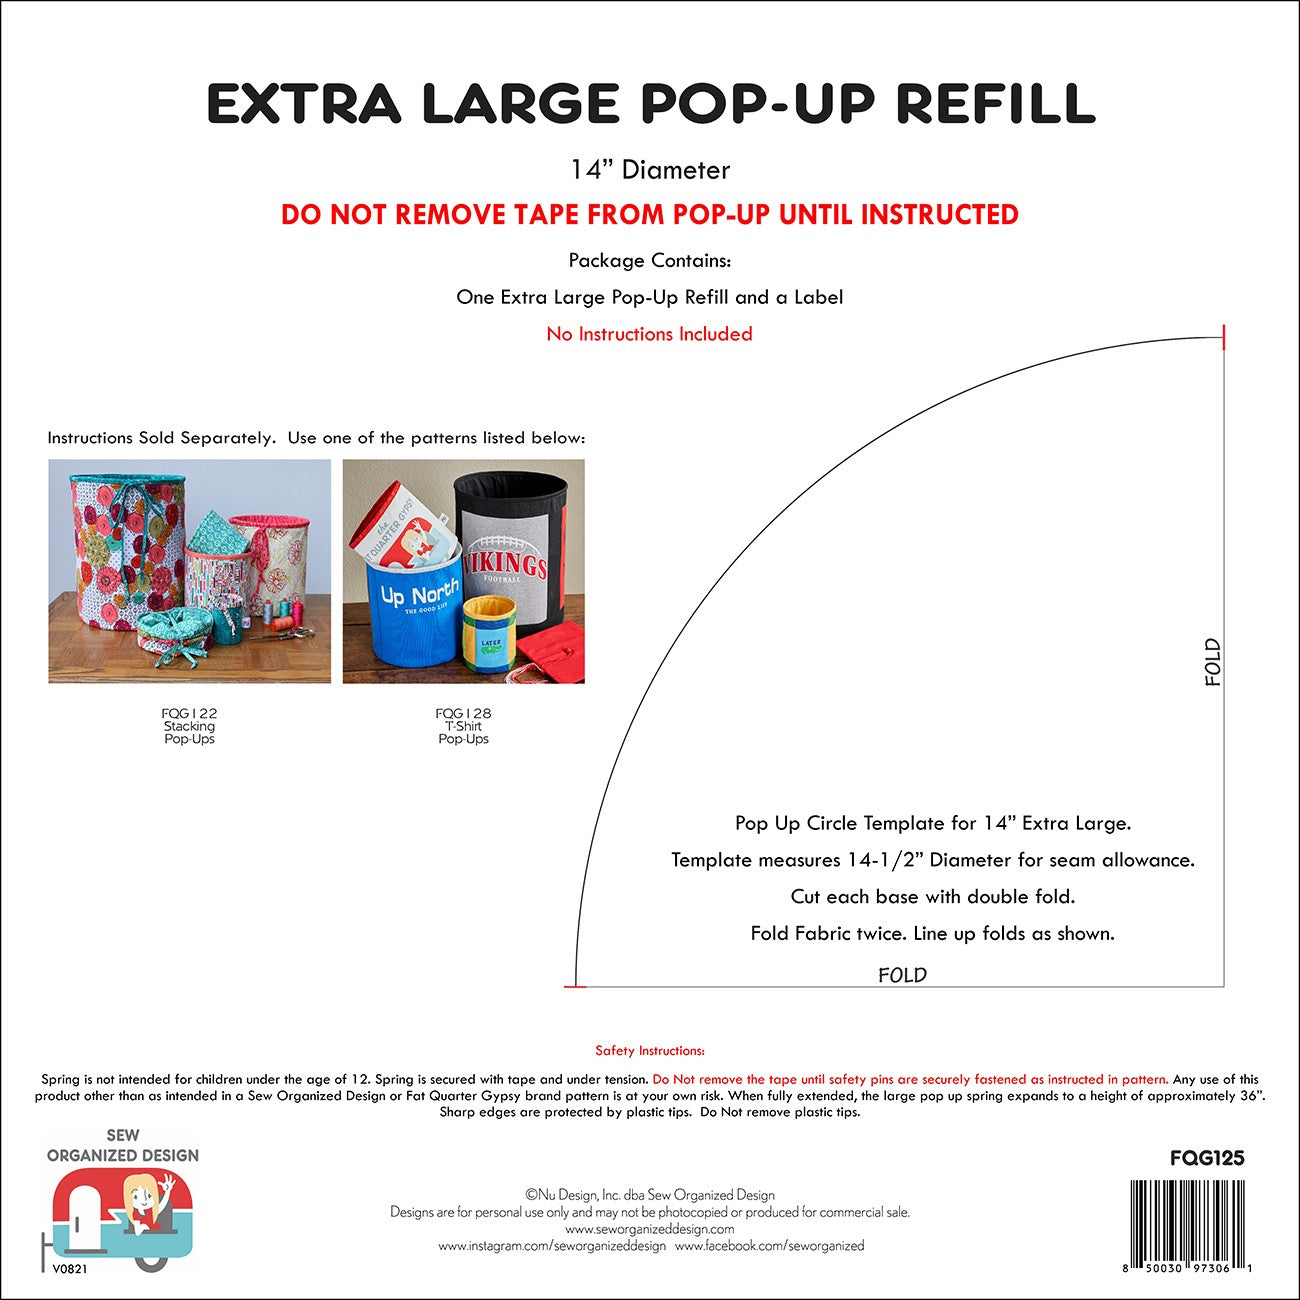 Extra Large 14-Inch Pop Up Refill by Joanne Hillestad for Sew Organized Design